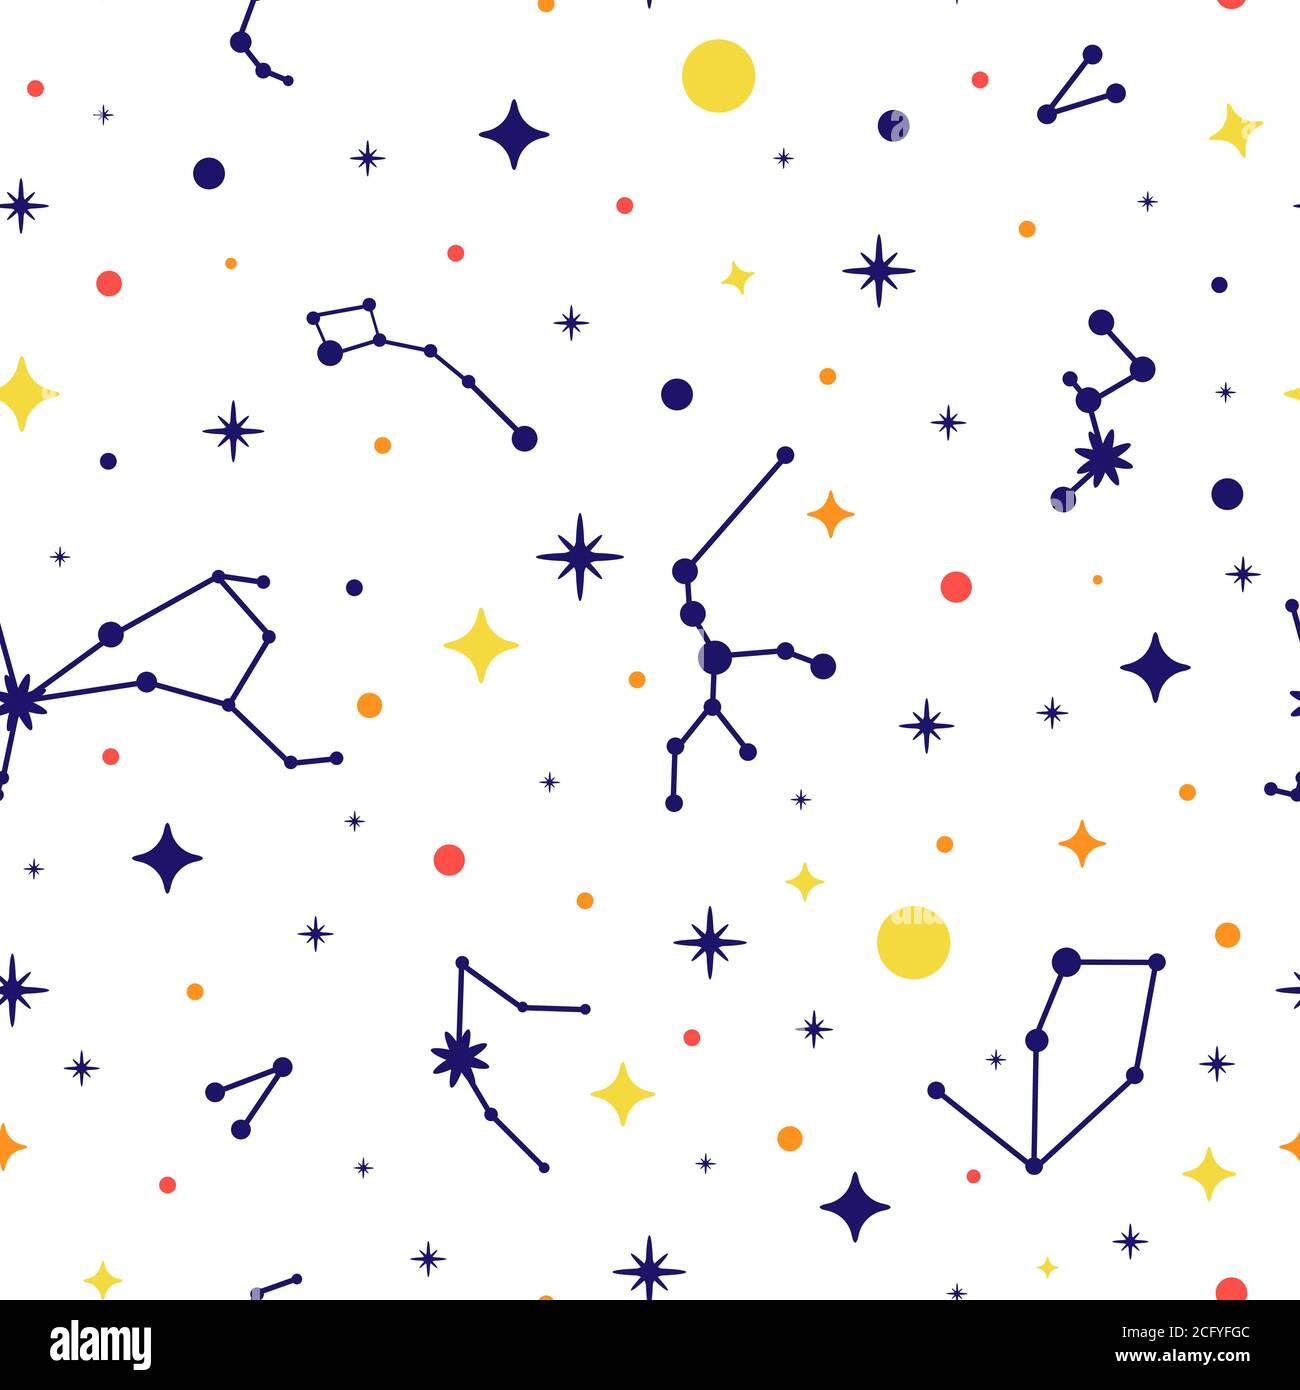 Constellation seamless pattern. Space background. Space pattern with stars, constellations. Vector illustration for print, card, poster, brochure Stock Vector